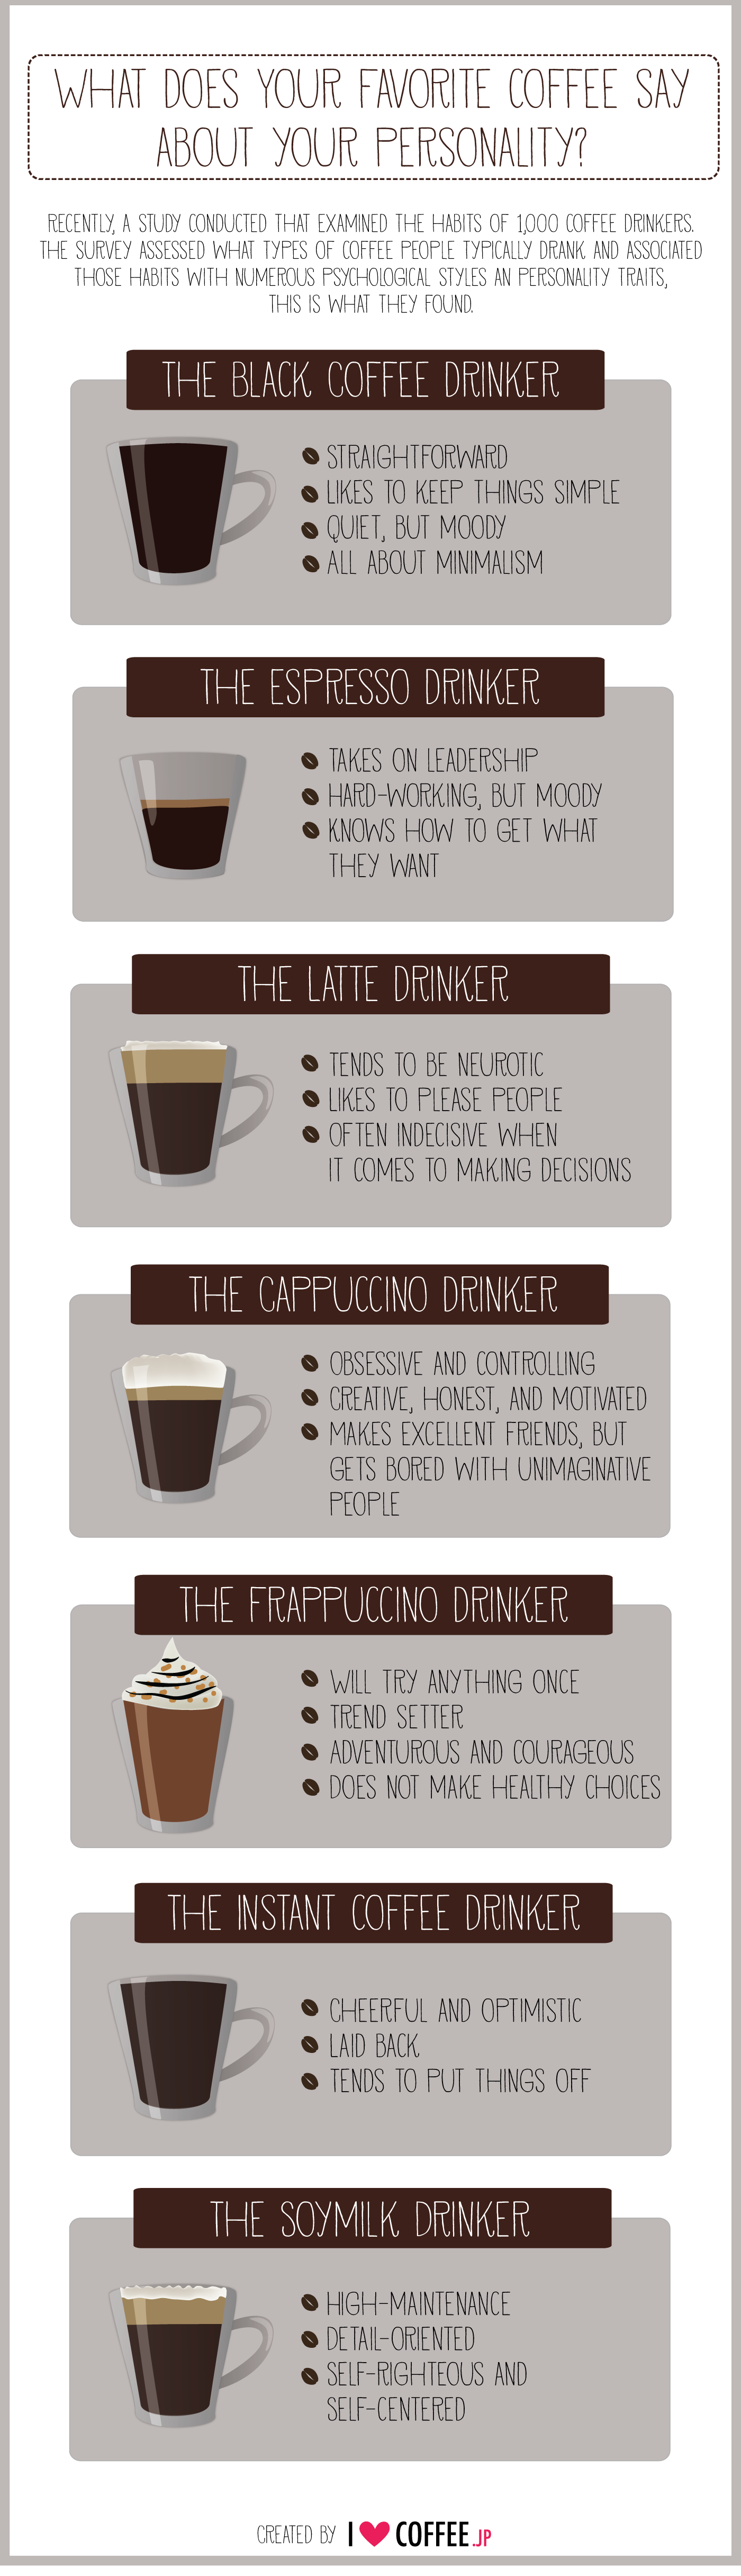 What Does Your Favourite Coffee Say About Your Personality?